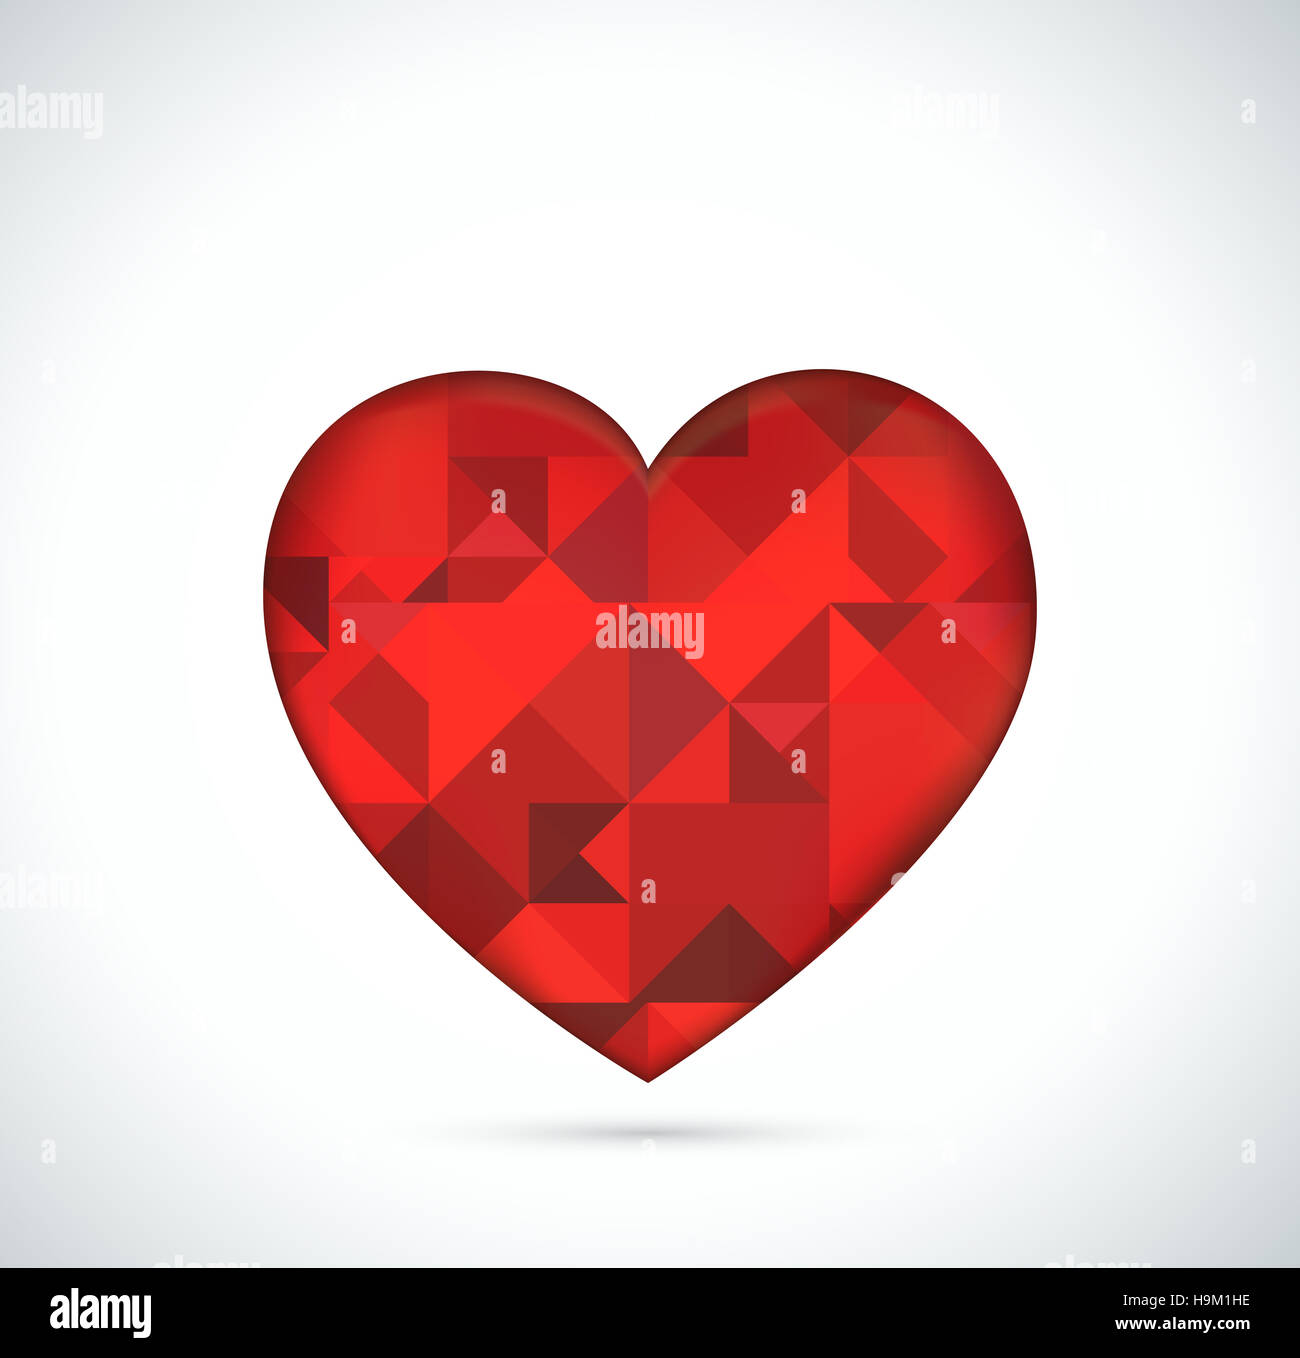 Red heart of the polygonal geometric shapes Stock Photo